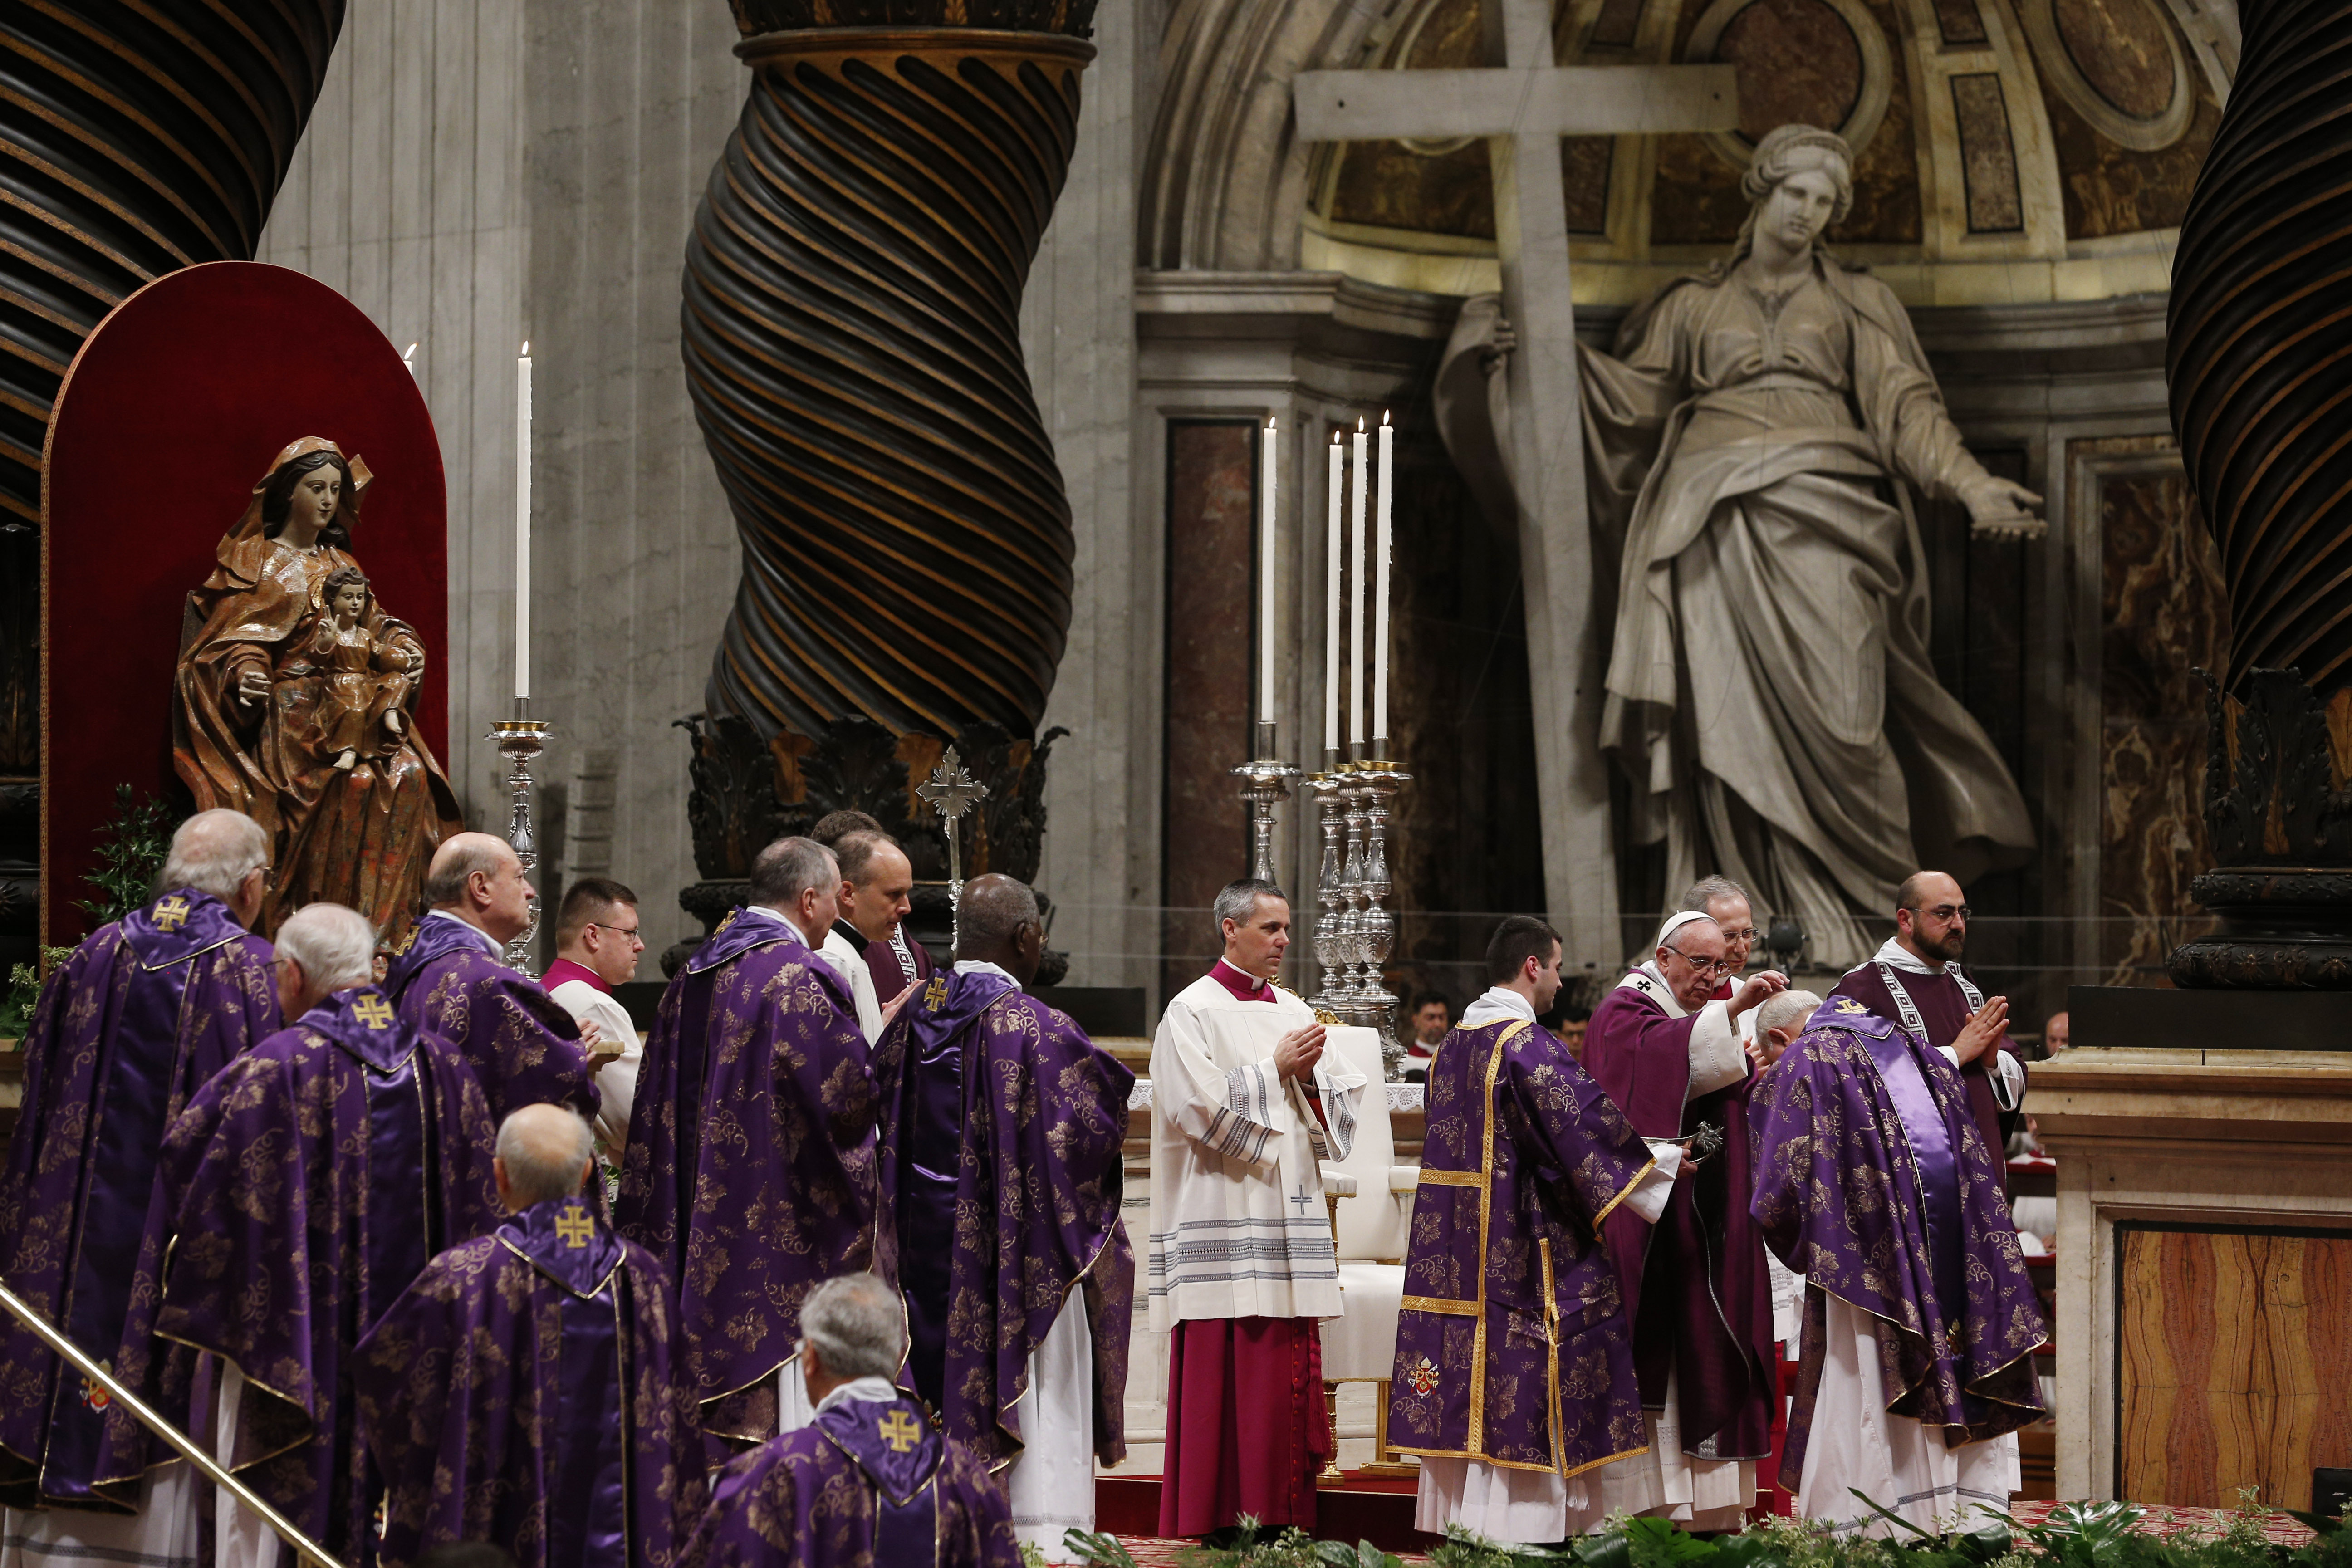 Pope Francis places ashes on cardinals during Ash Wednesday Mass in St. Peter's Basilica at the Vatican Feb. 10. (CNS/Paul Haring)